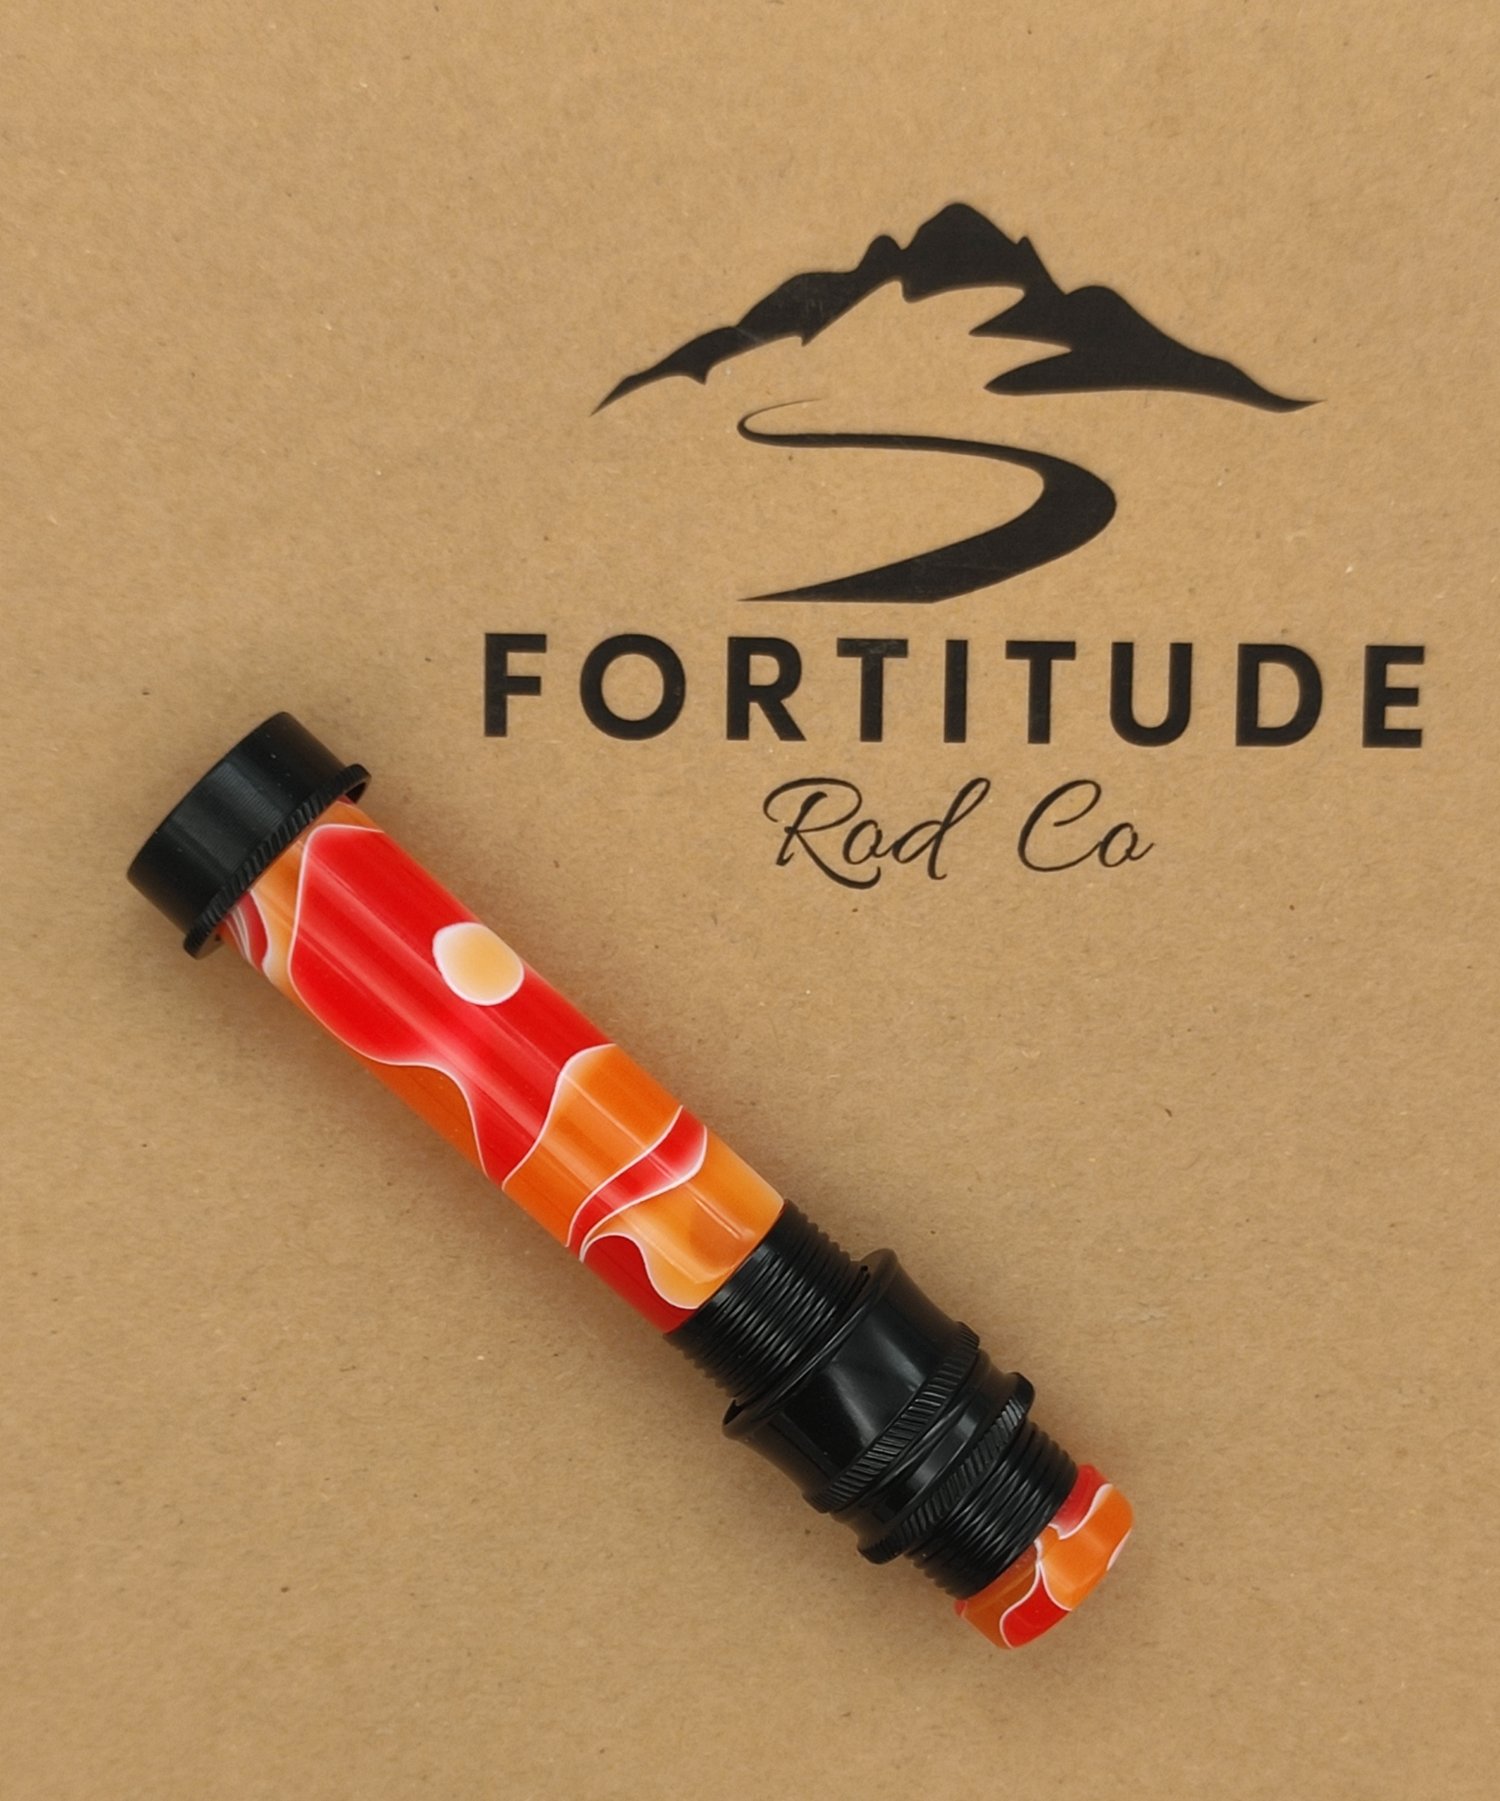 Acrylic Inserts For FRC-UL6S — Fortitude Rod Co